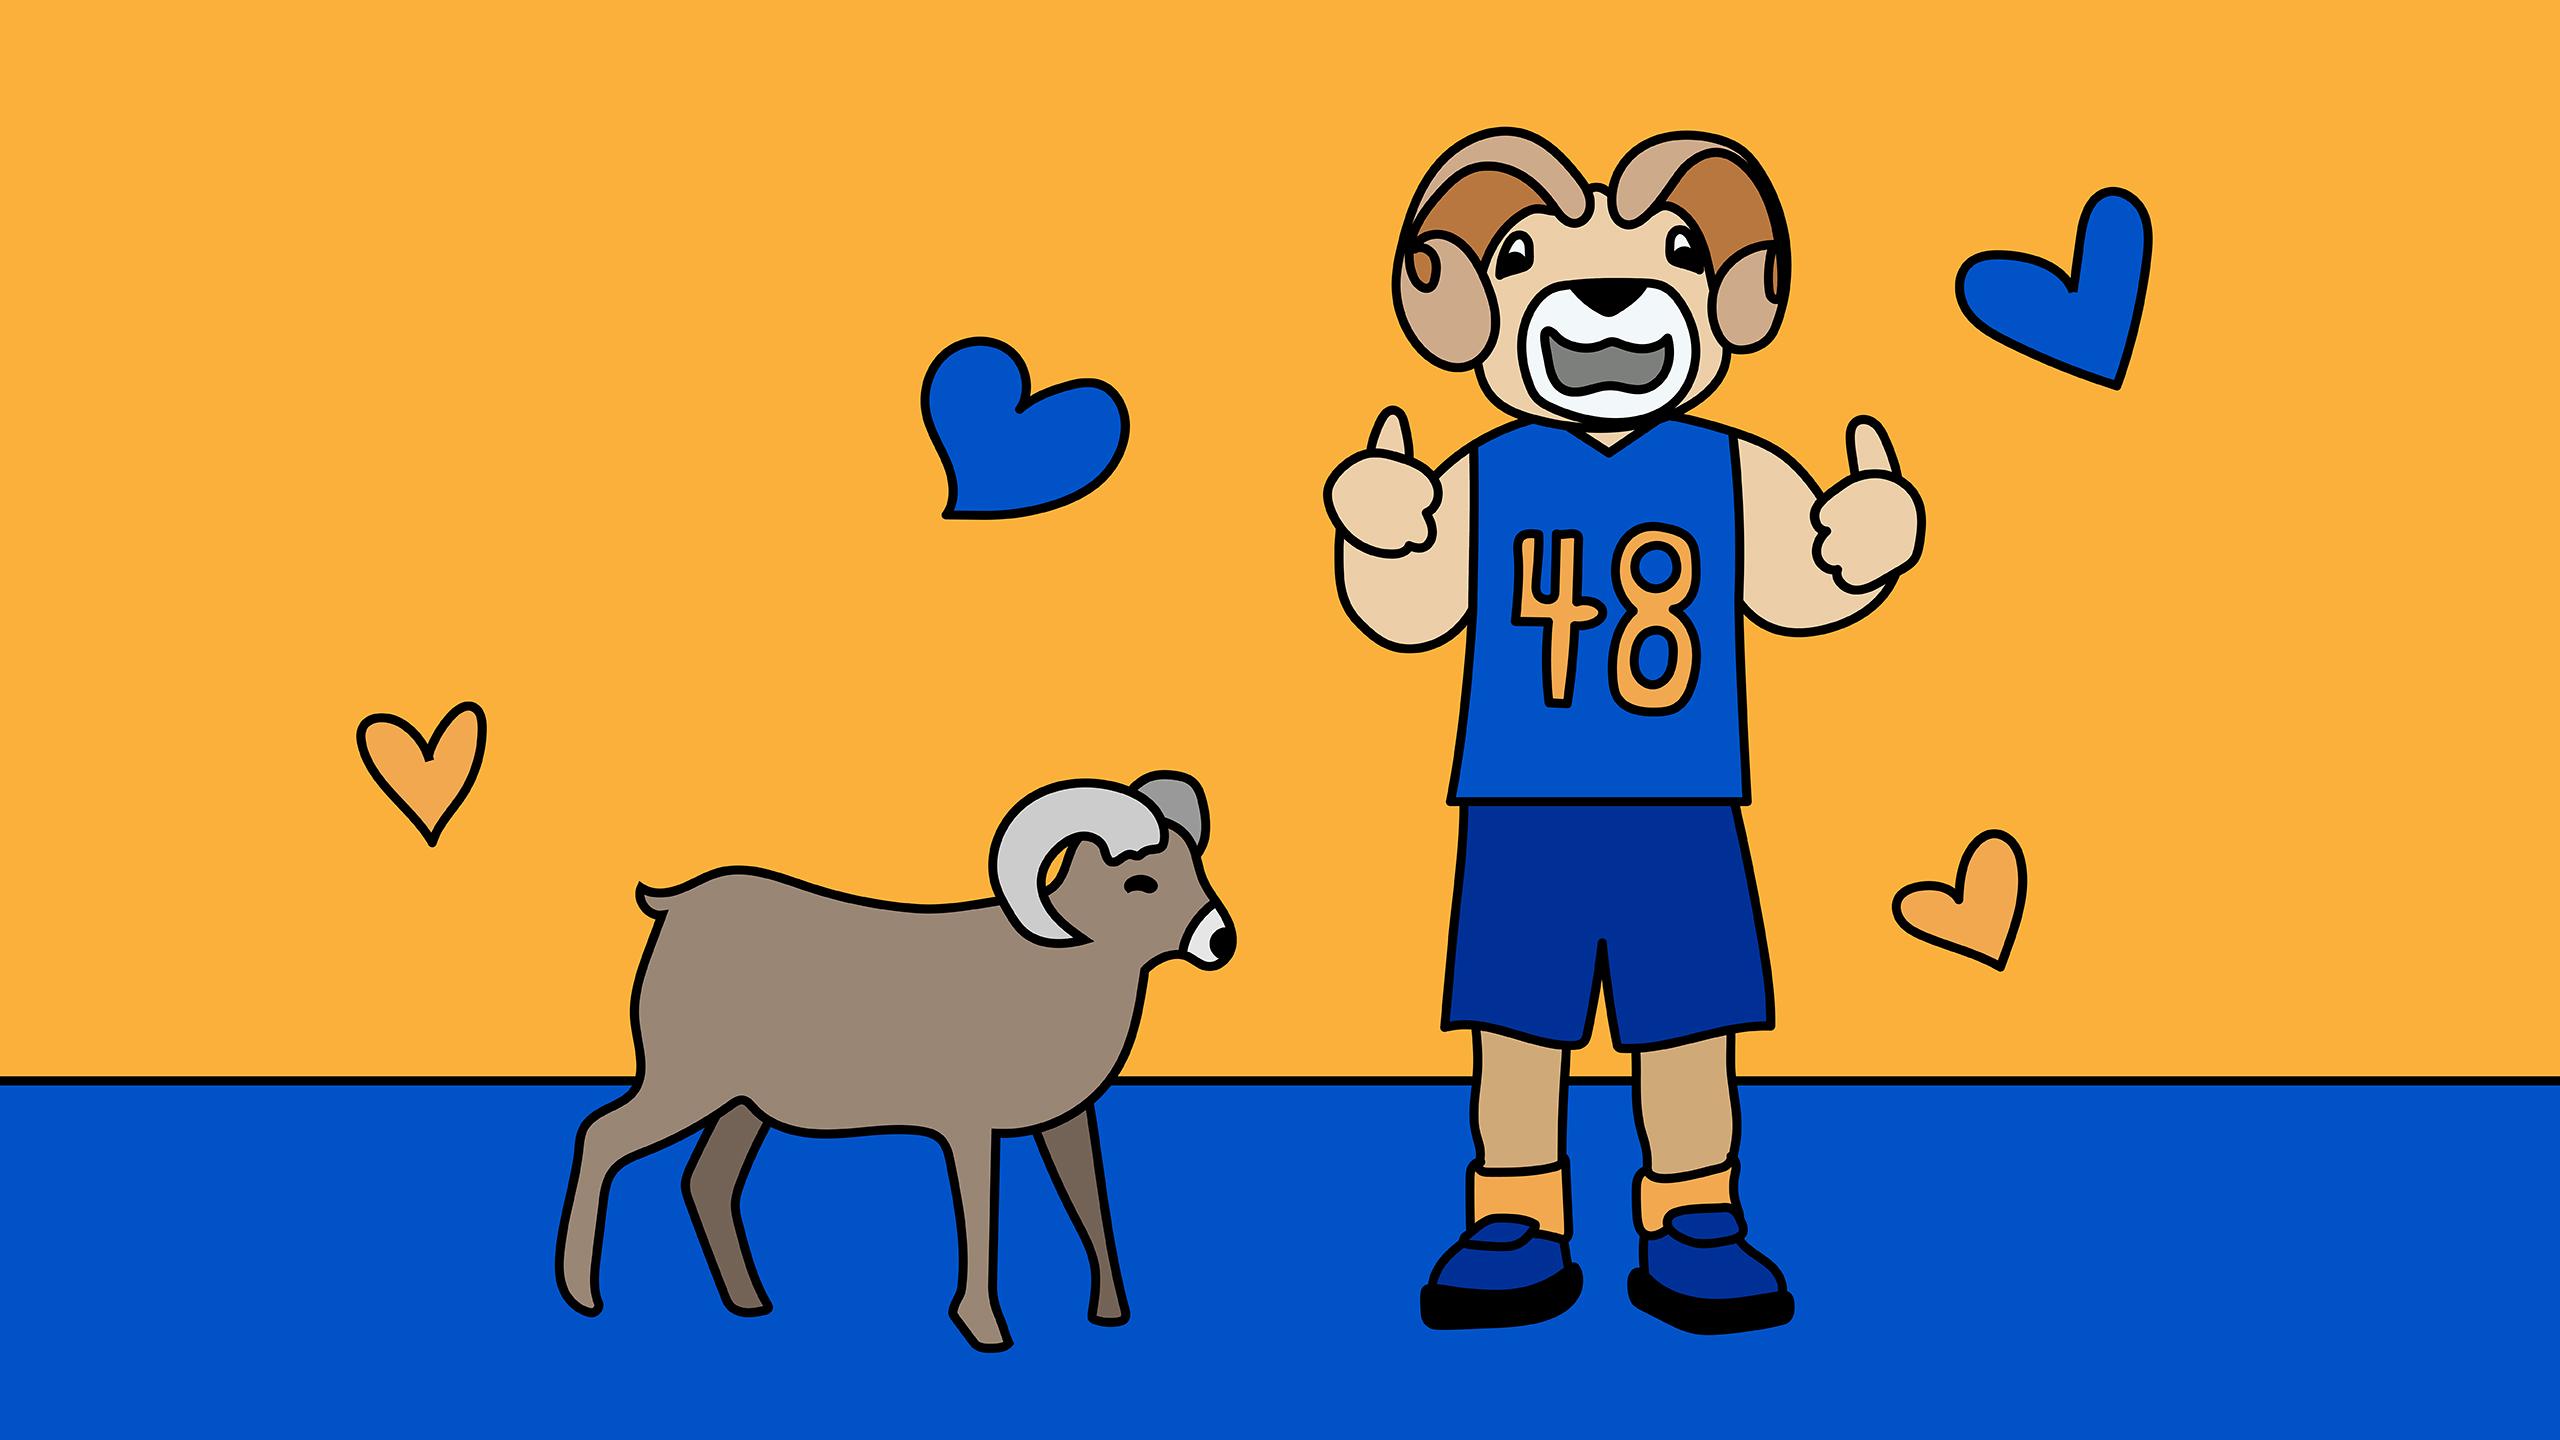 Illustration of a ram and Ryerson's mascot Eggy surrounded by yellow and blue hearts.